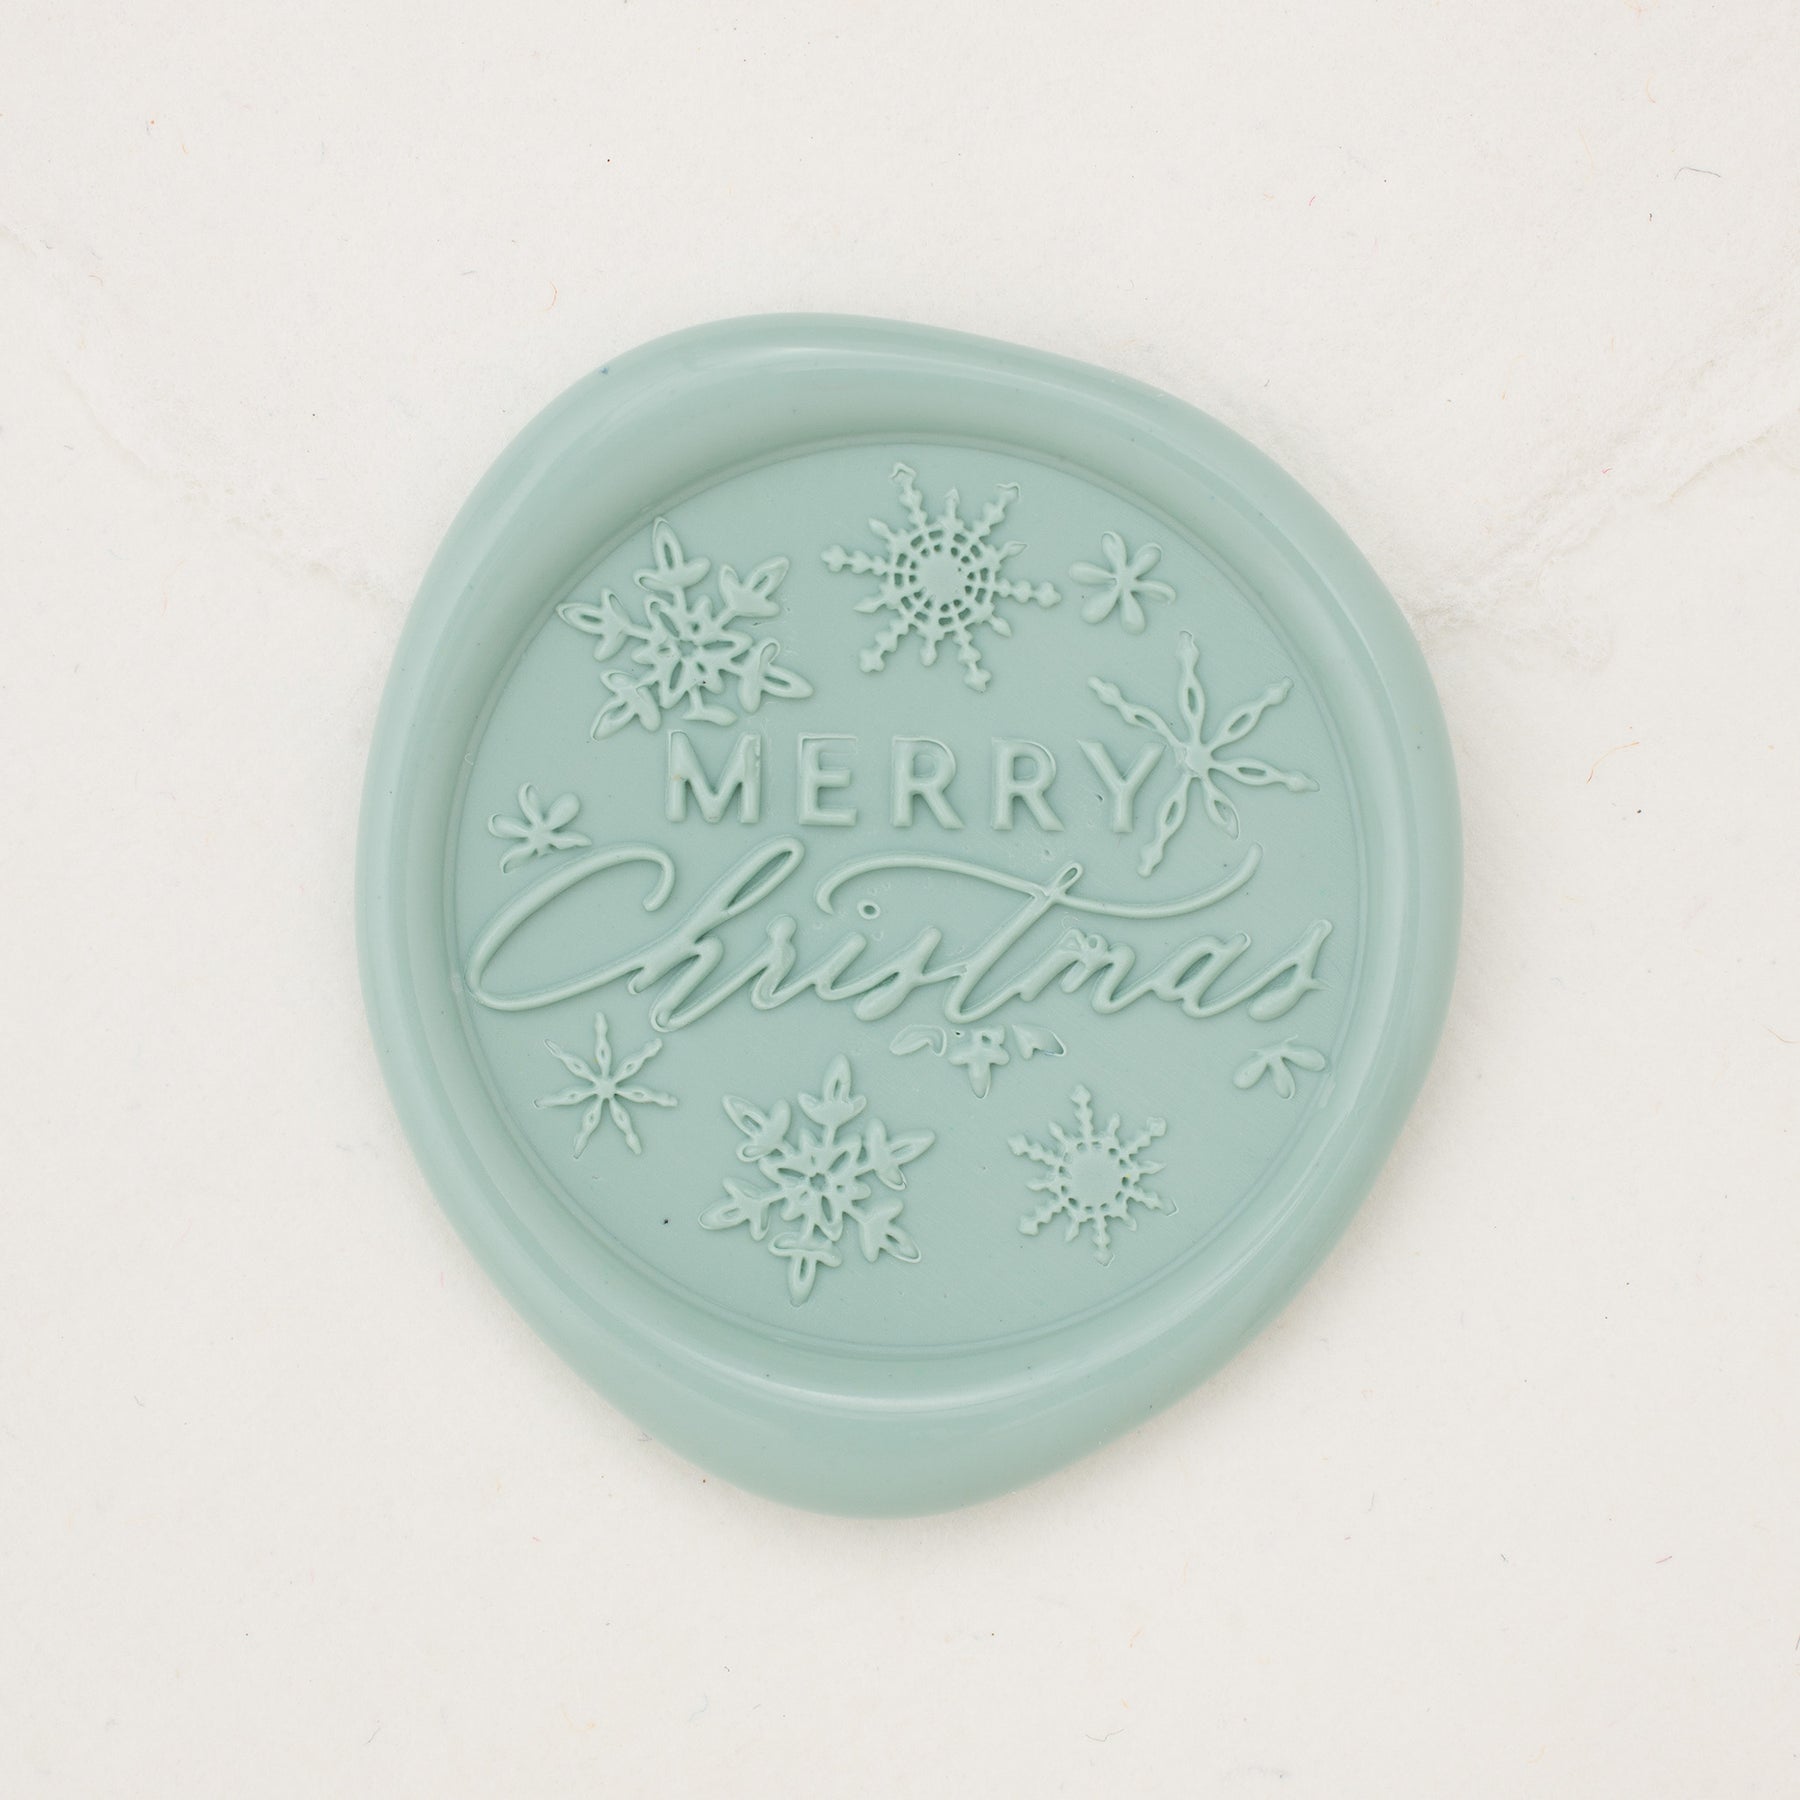 Ready Made Wax Seal Stamp - Merry Christmas Wax Seal Stamp (9 Designs)